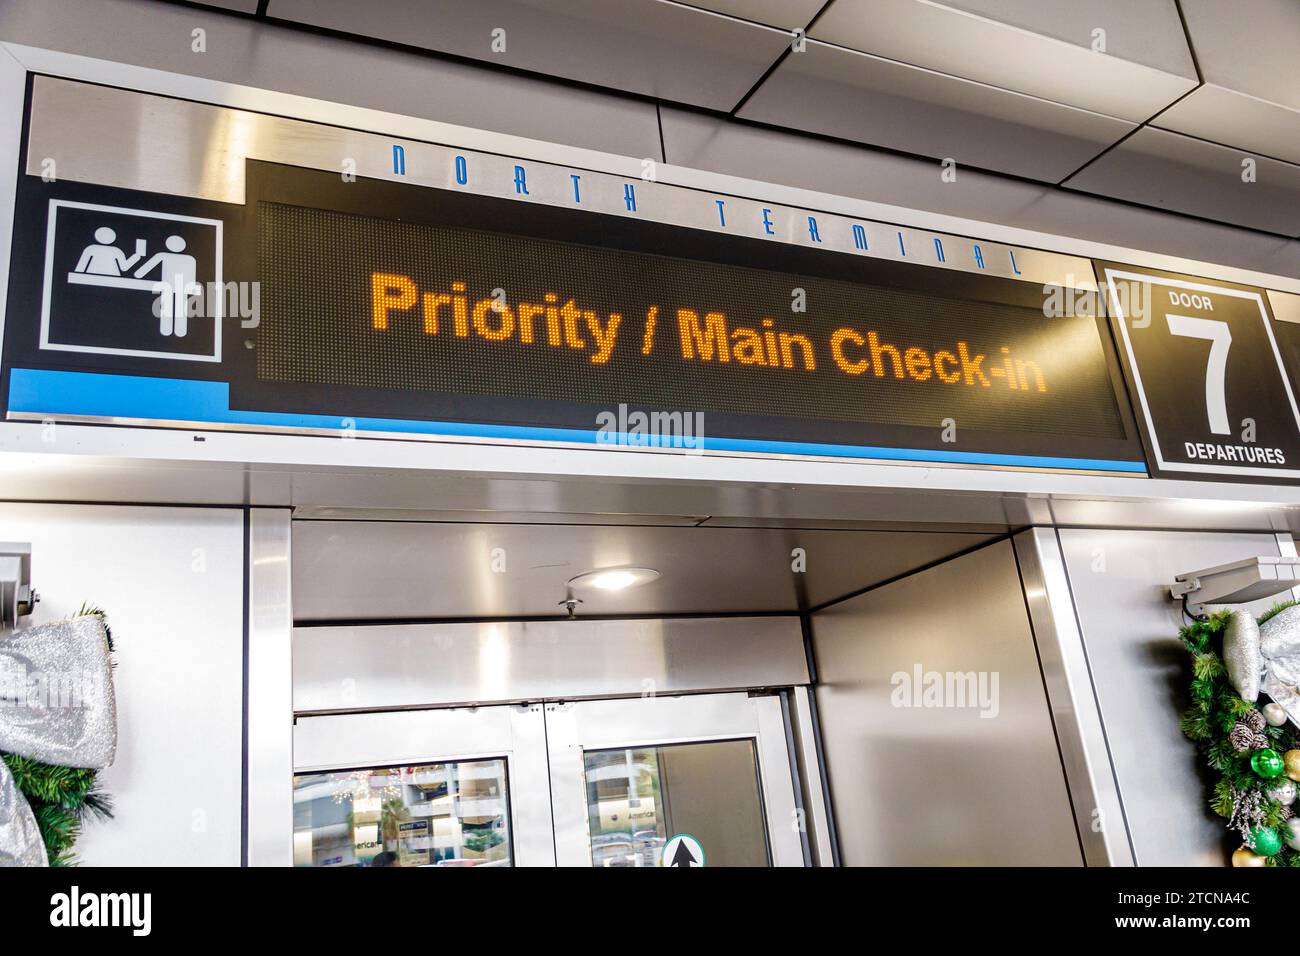 Miami Florida,Miami International Airport MIA,inside interior indoors,terminal entrance priority main check-in,digital marquee sign information,employ Stock Photo